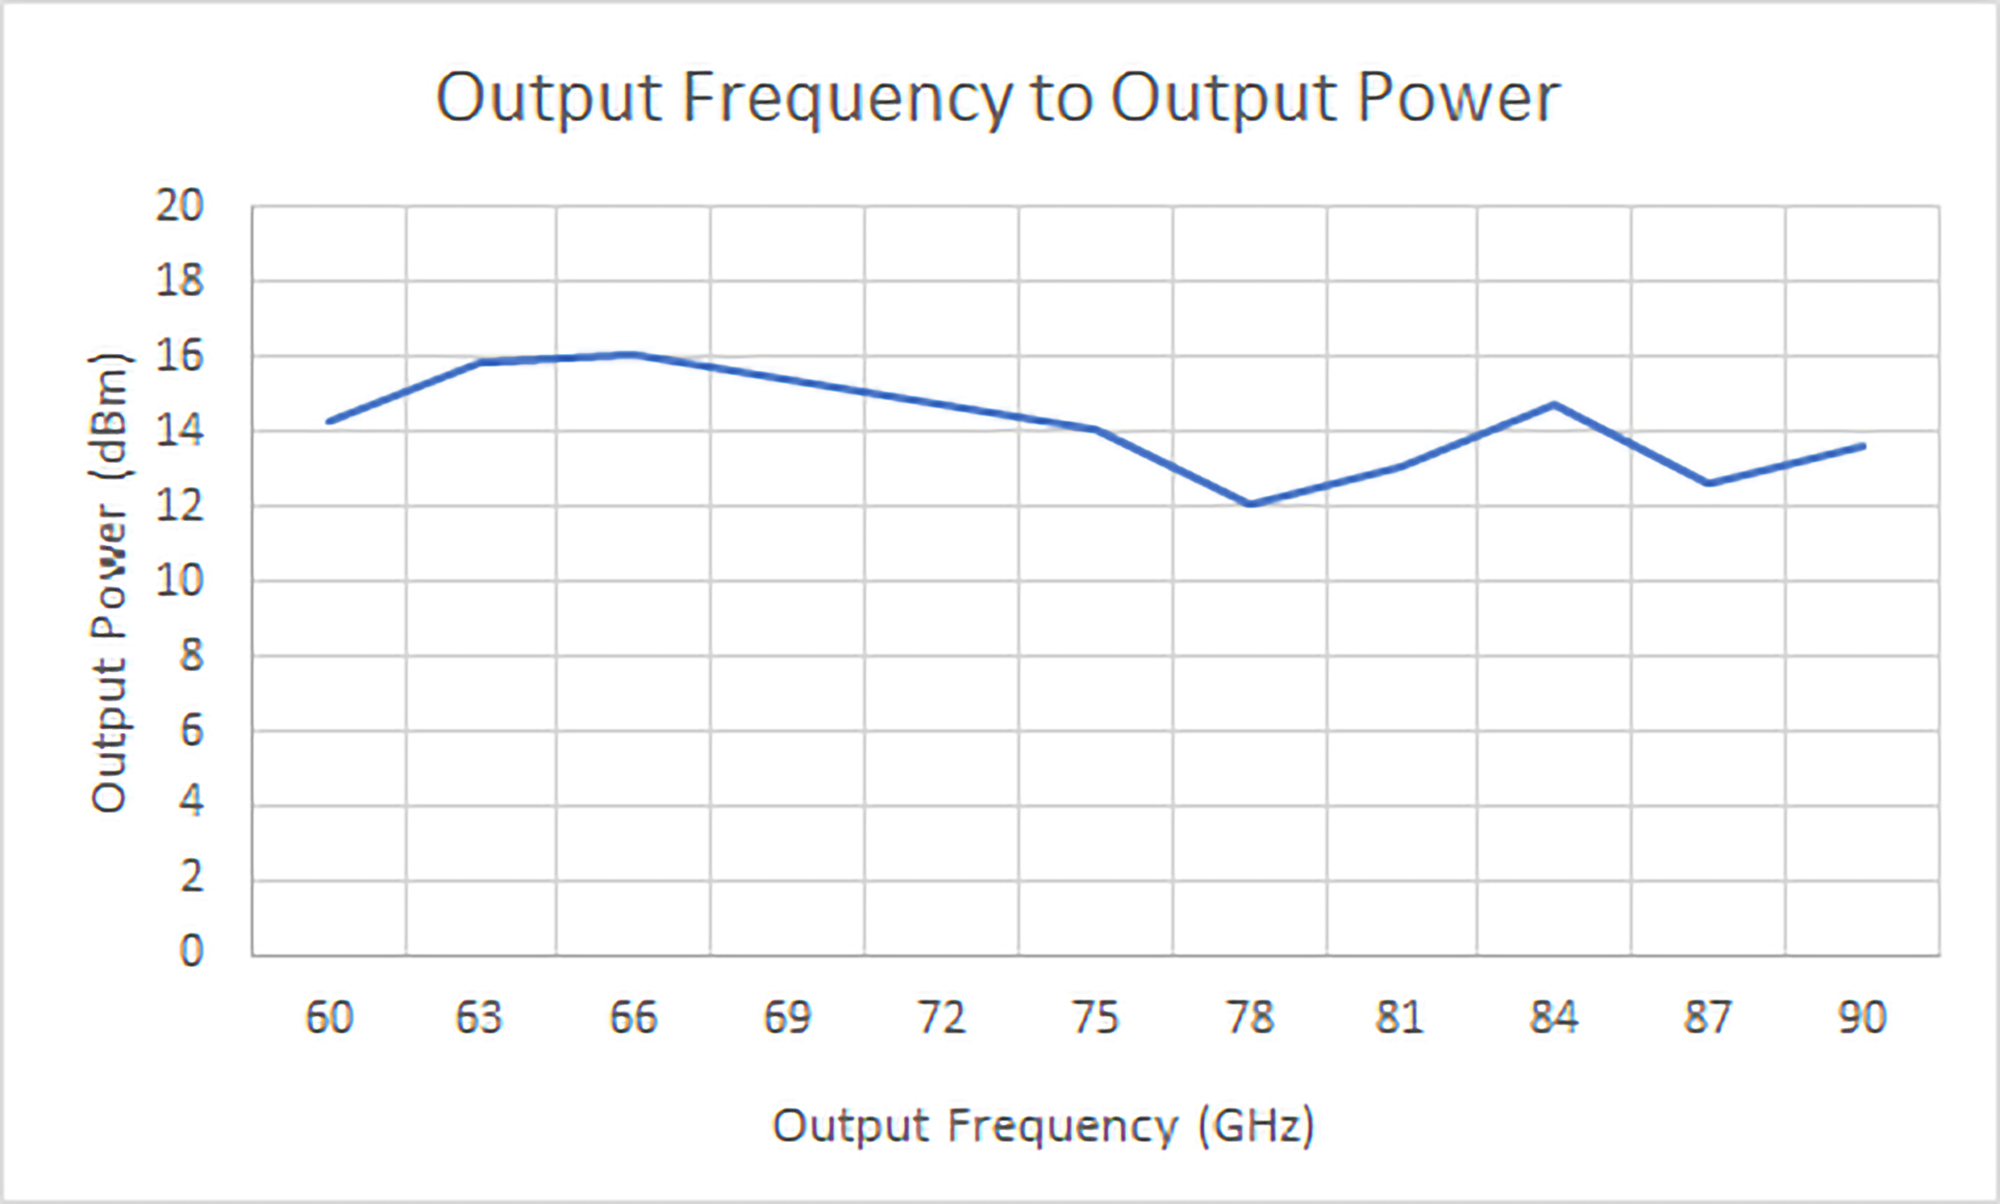 hwfm12-sf4x13-power-frequency-graph.png